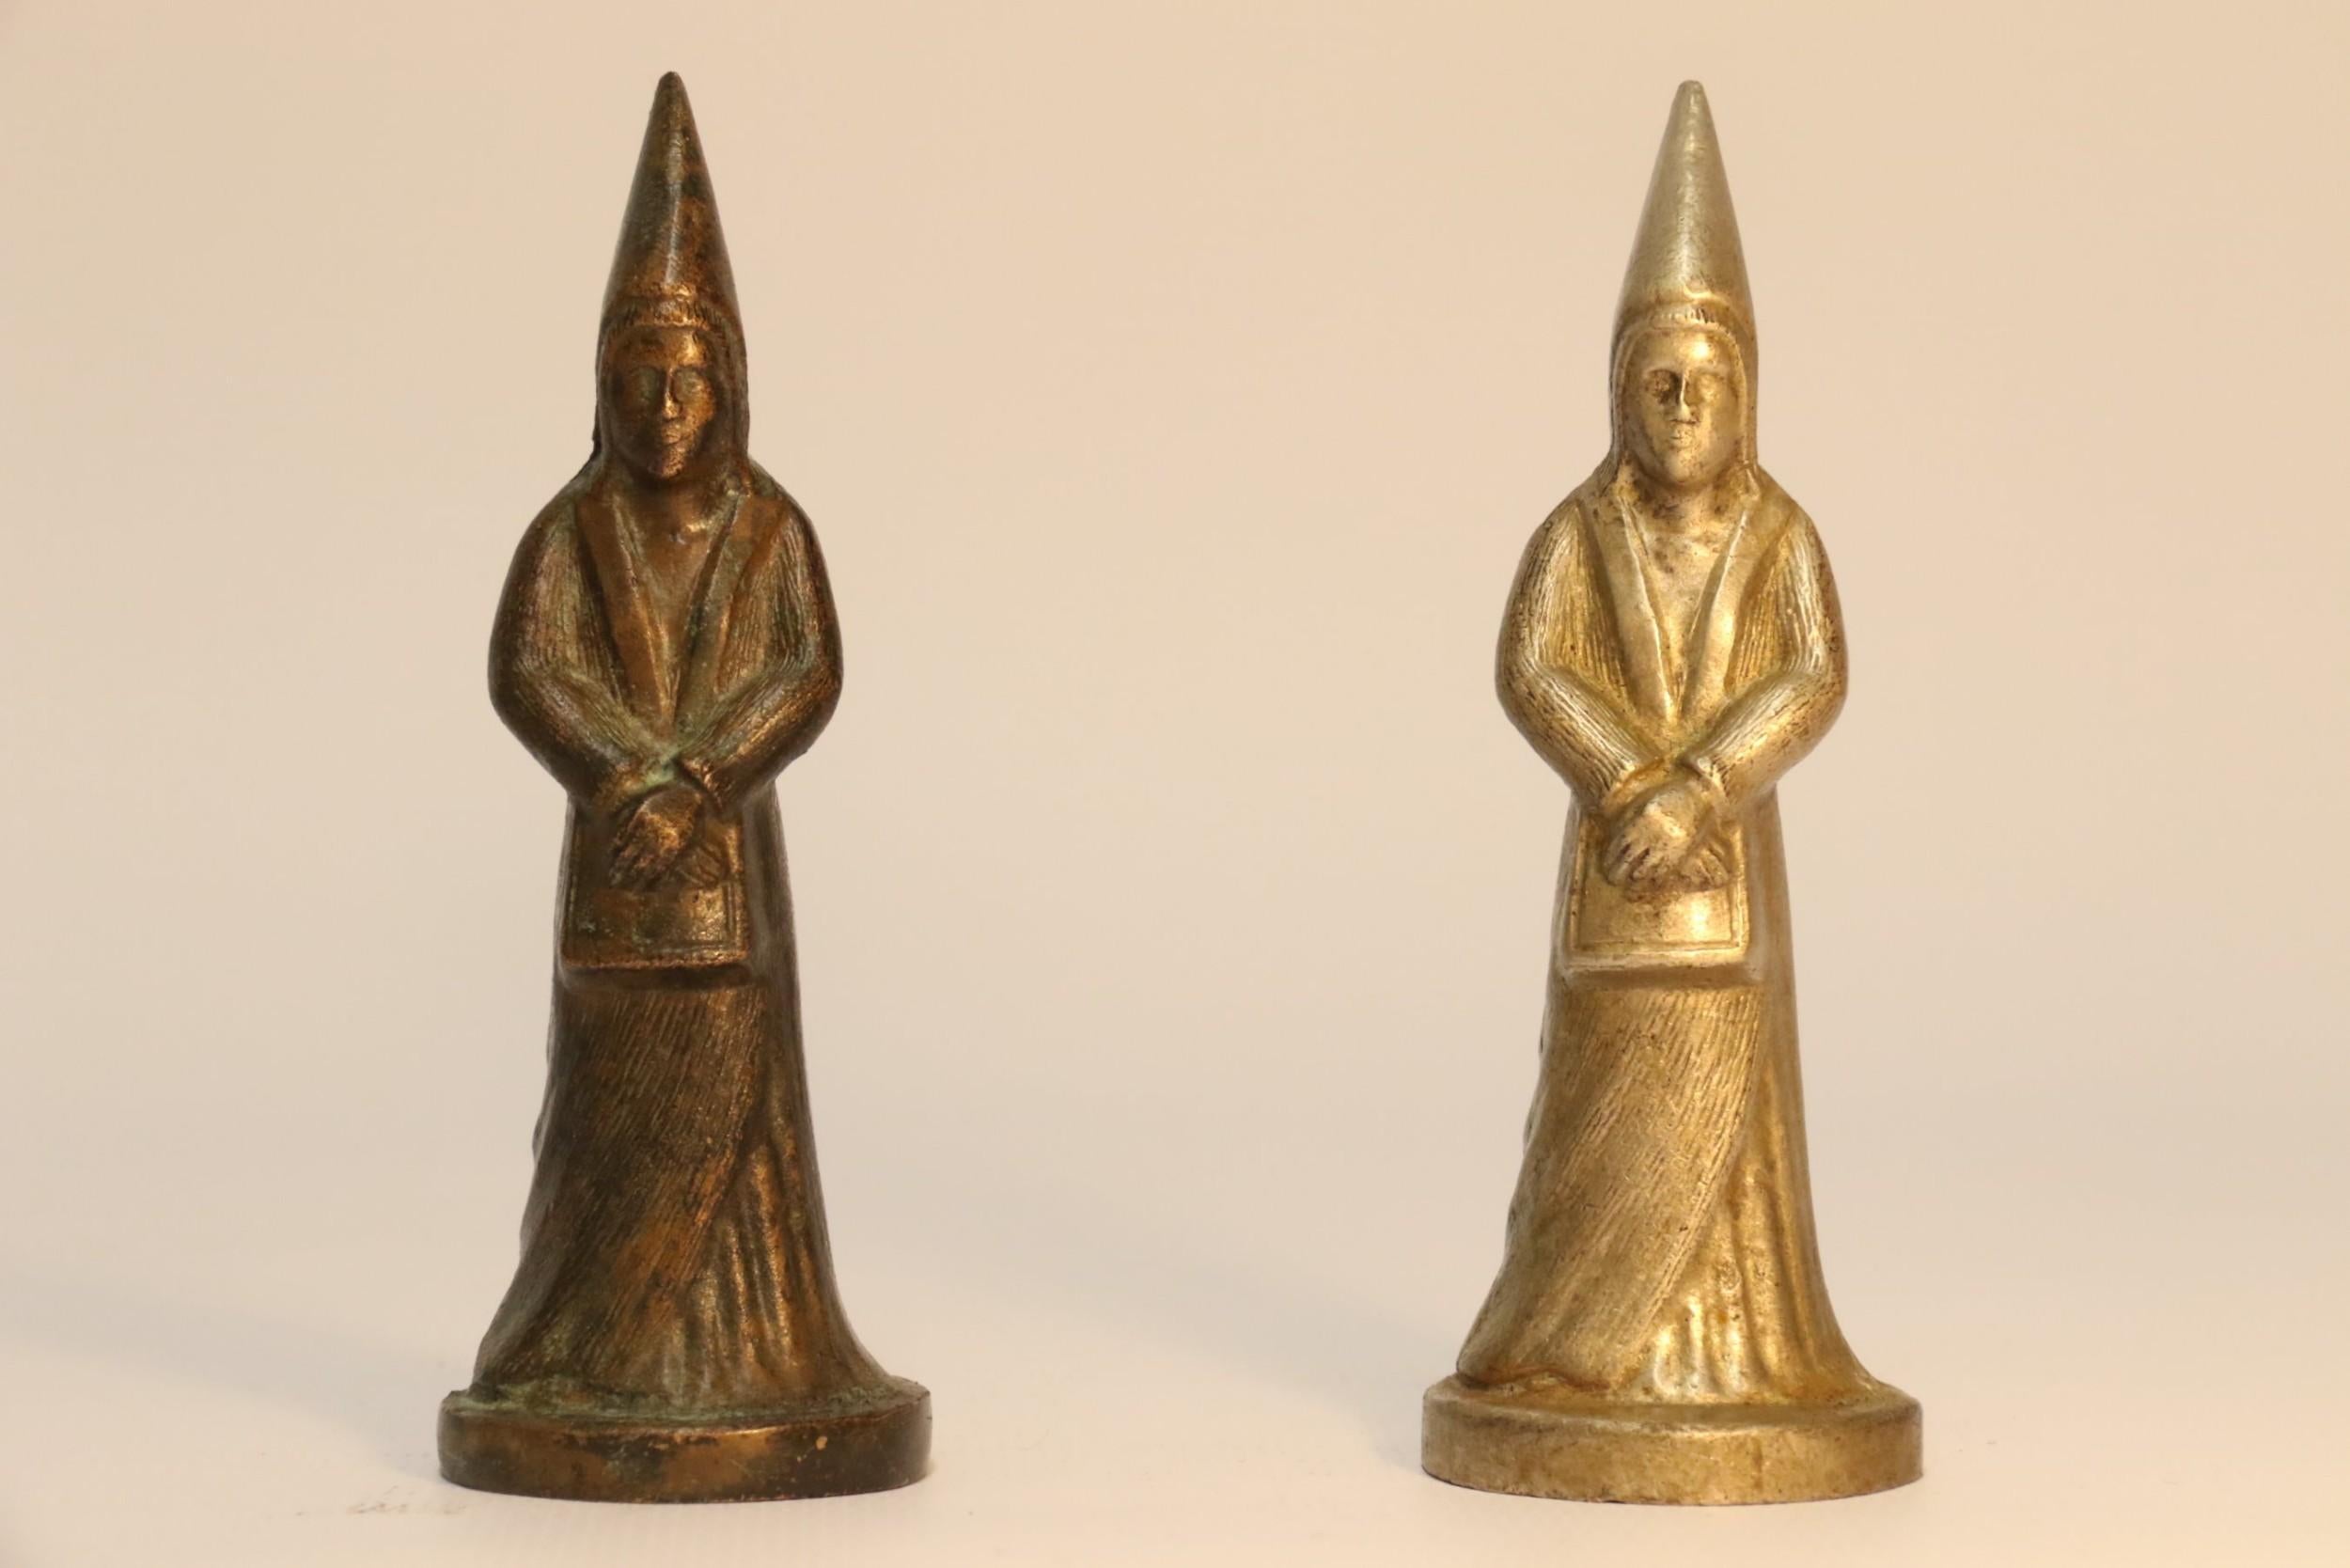 Novelty Heavy Cast Nickel and Bronze Chess Set Modeled on Medieval Figures For Sale 2